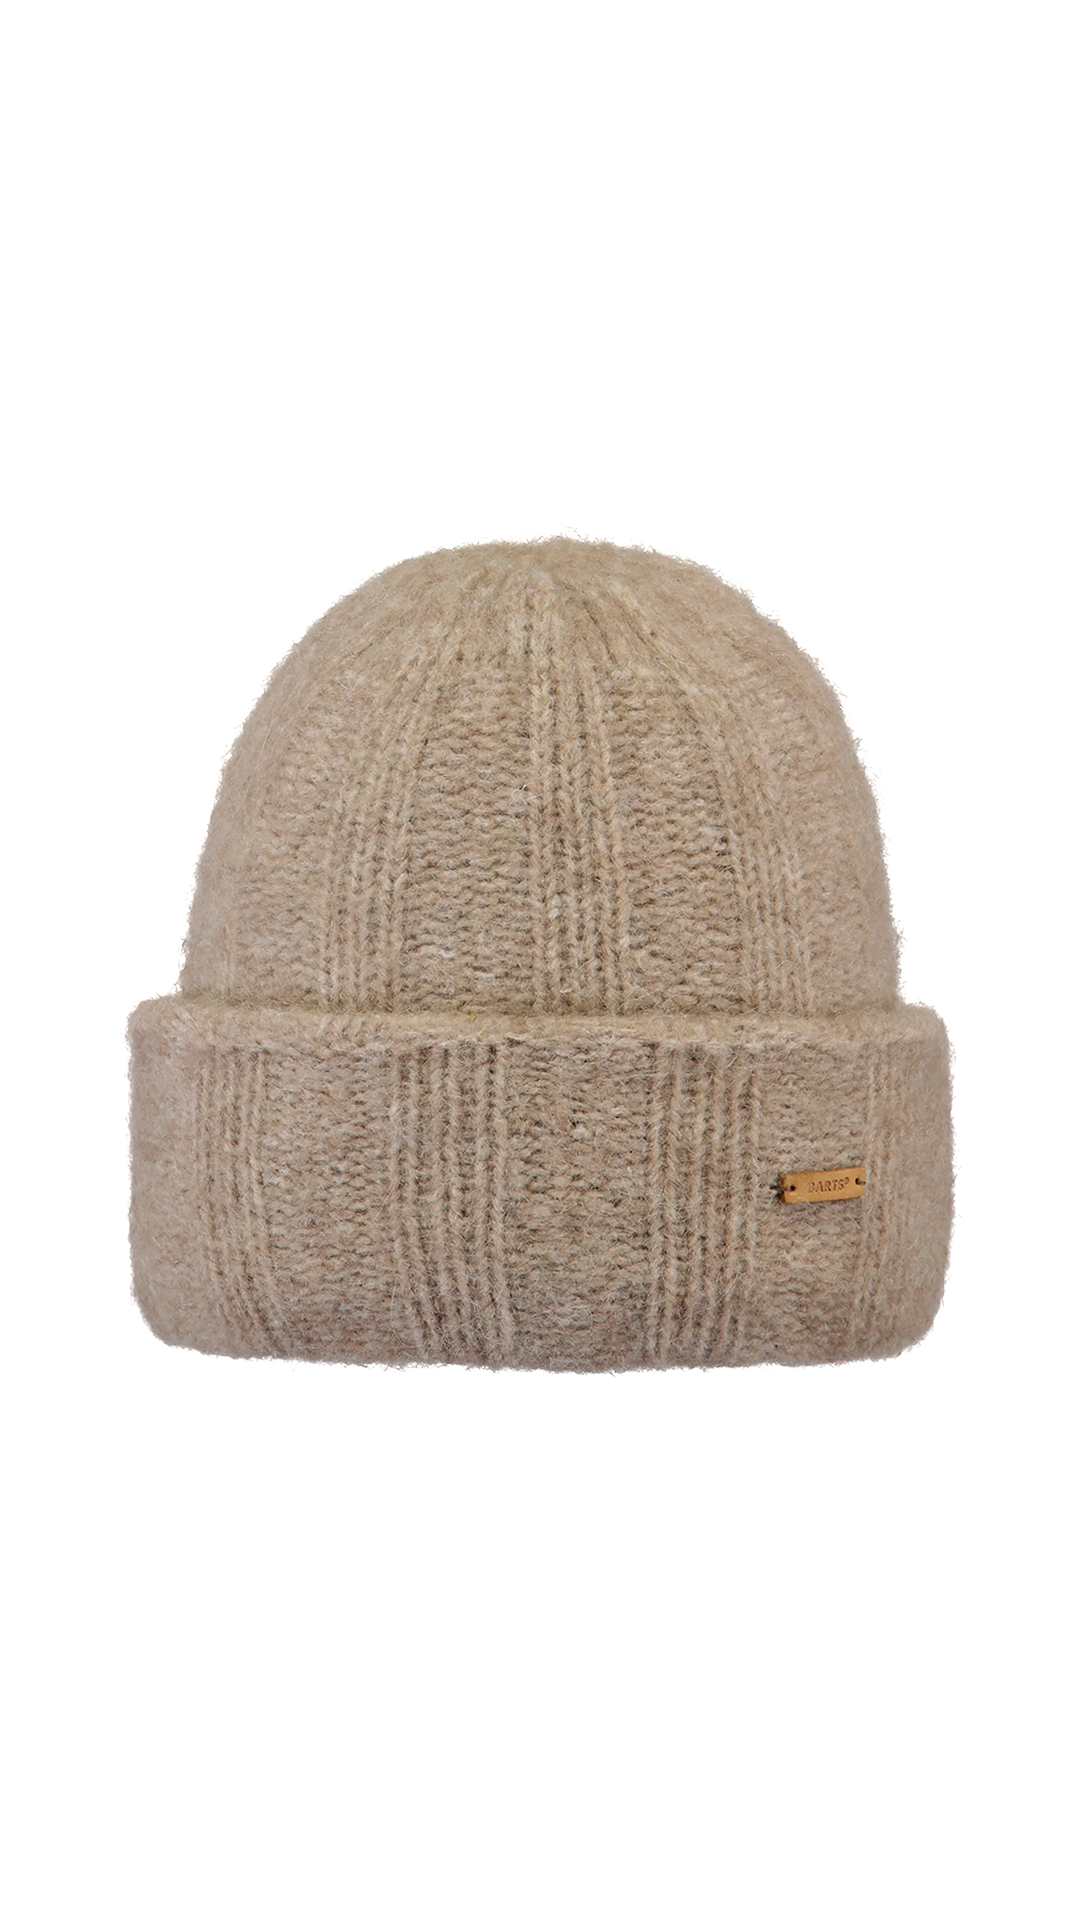 BARTS River Rush Beanie light brown - Order now at BARTS